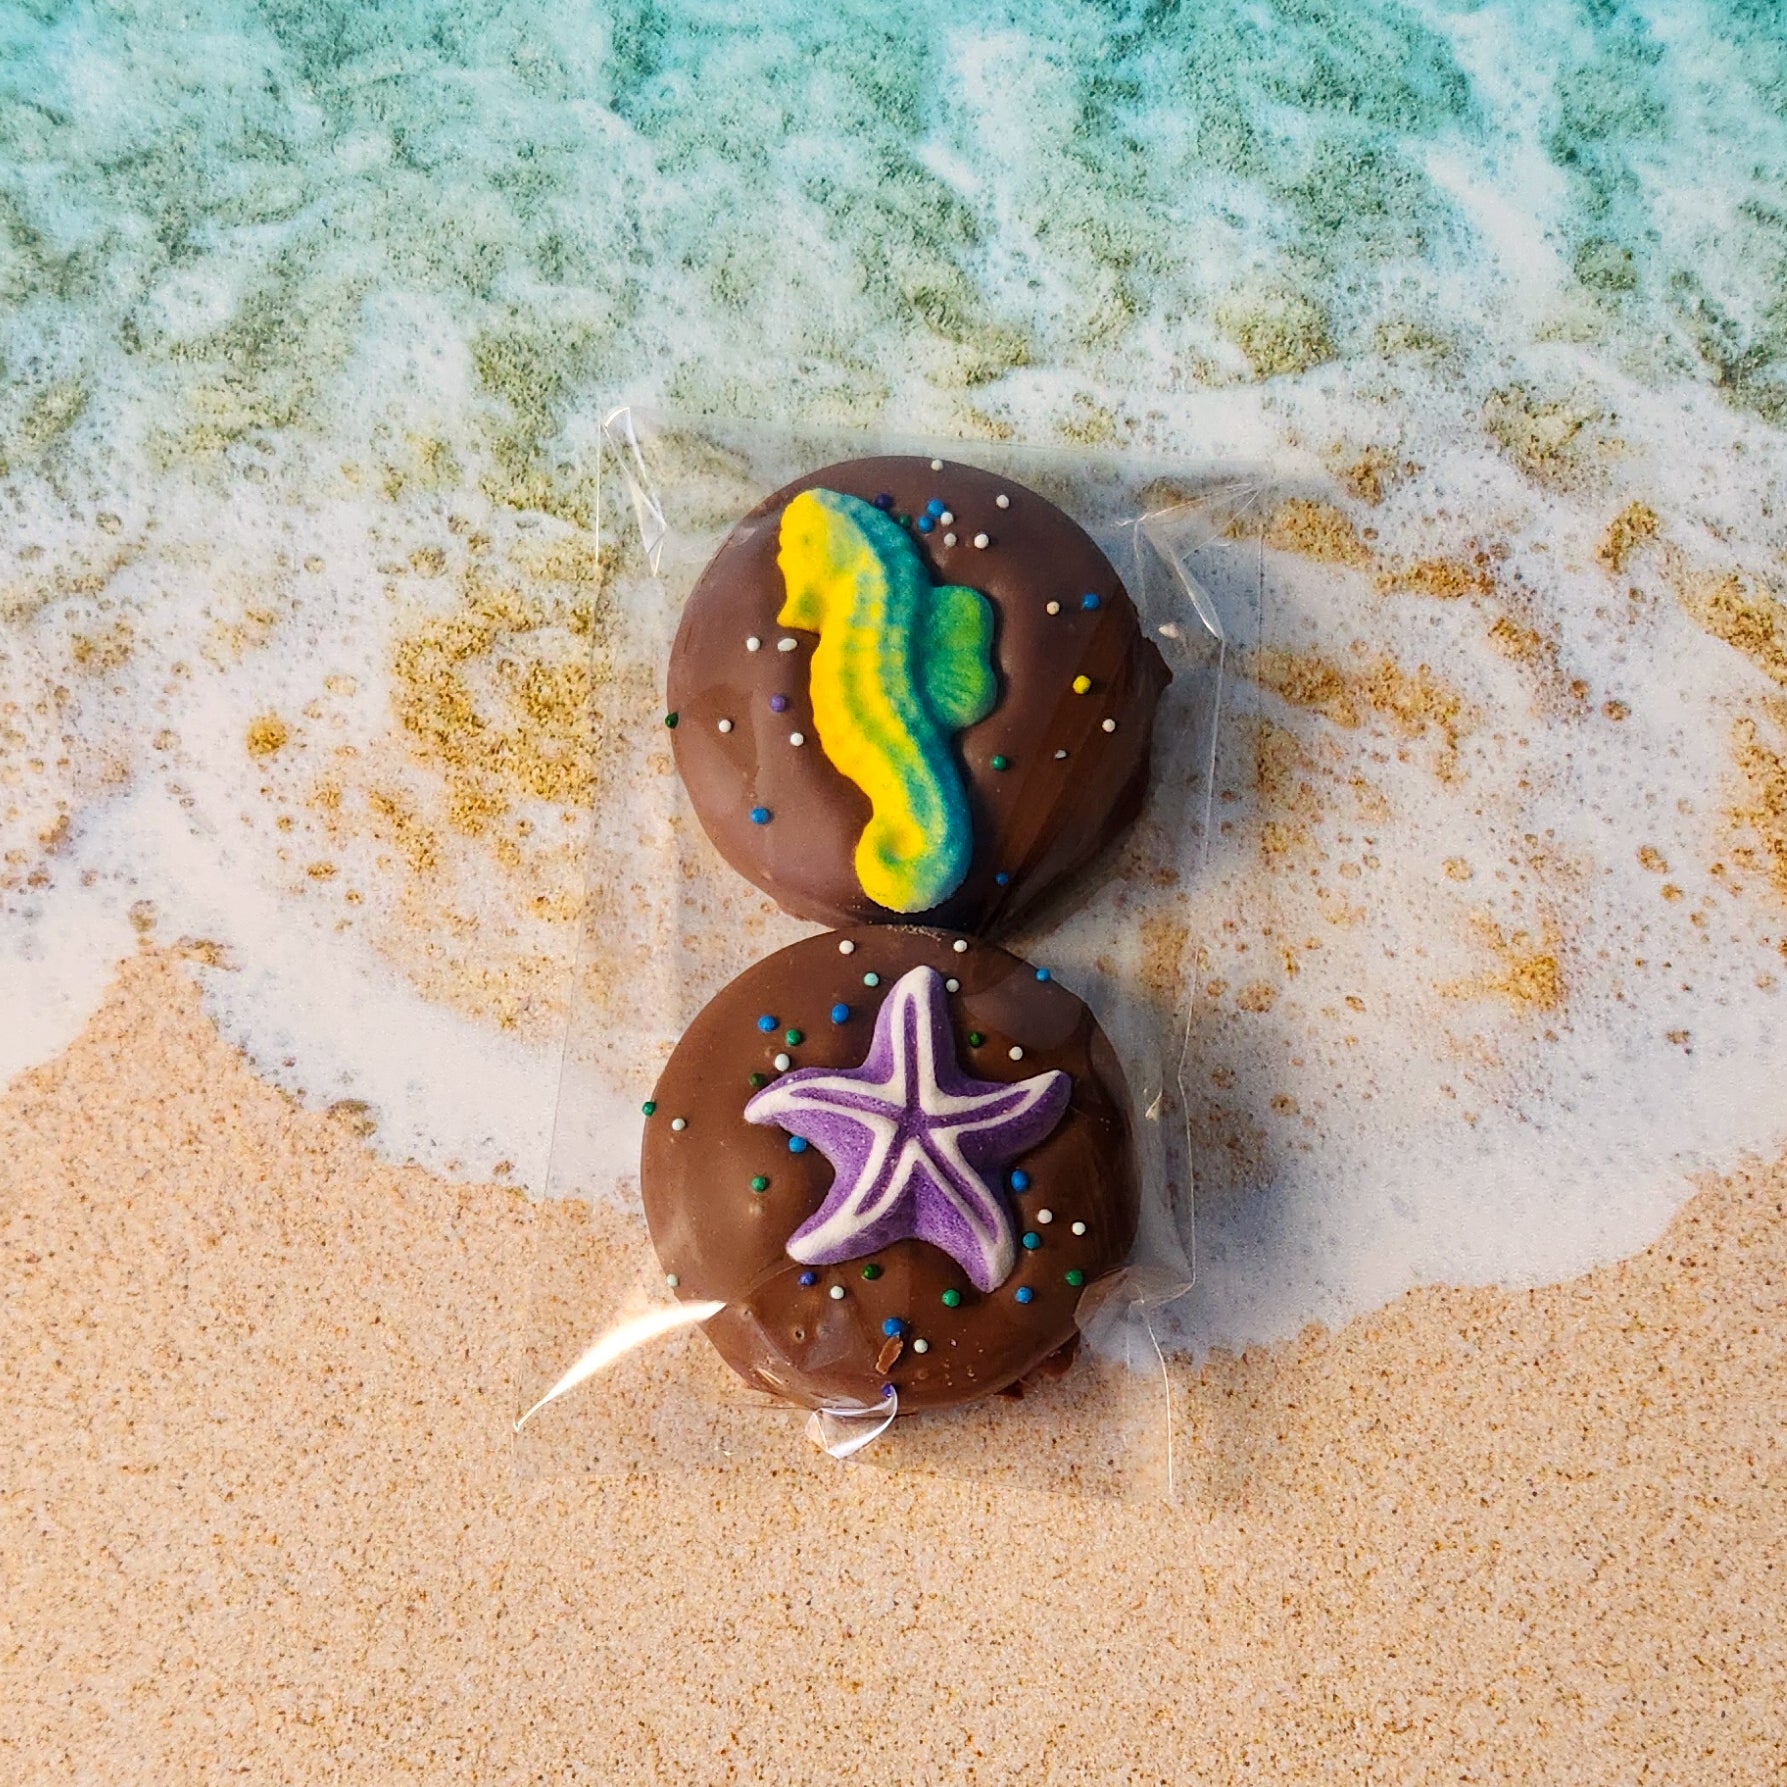 Two milk chocolate covered oreos packaged in a clear bag. Each oreo is decorated with nonpareils and a summer themed sugar decoration.